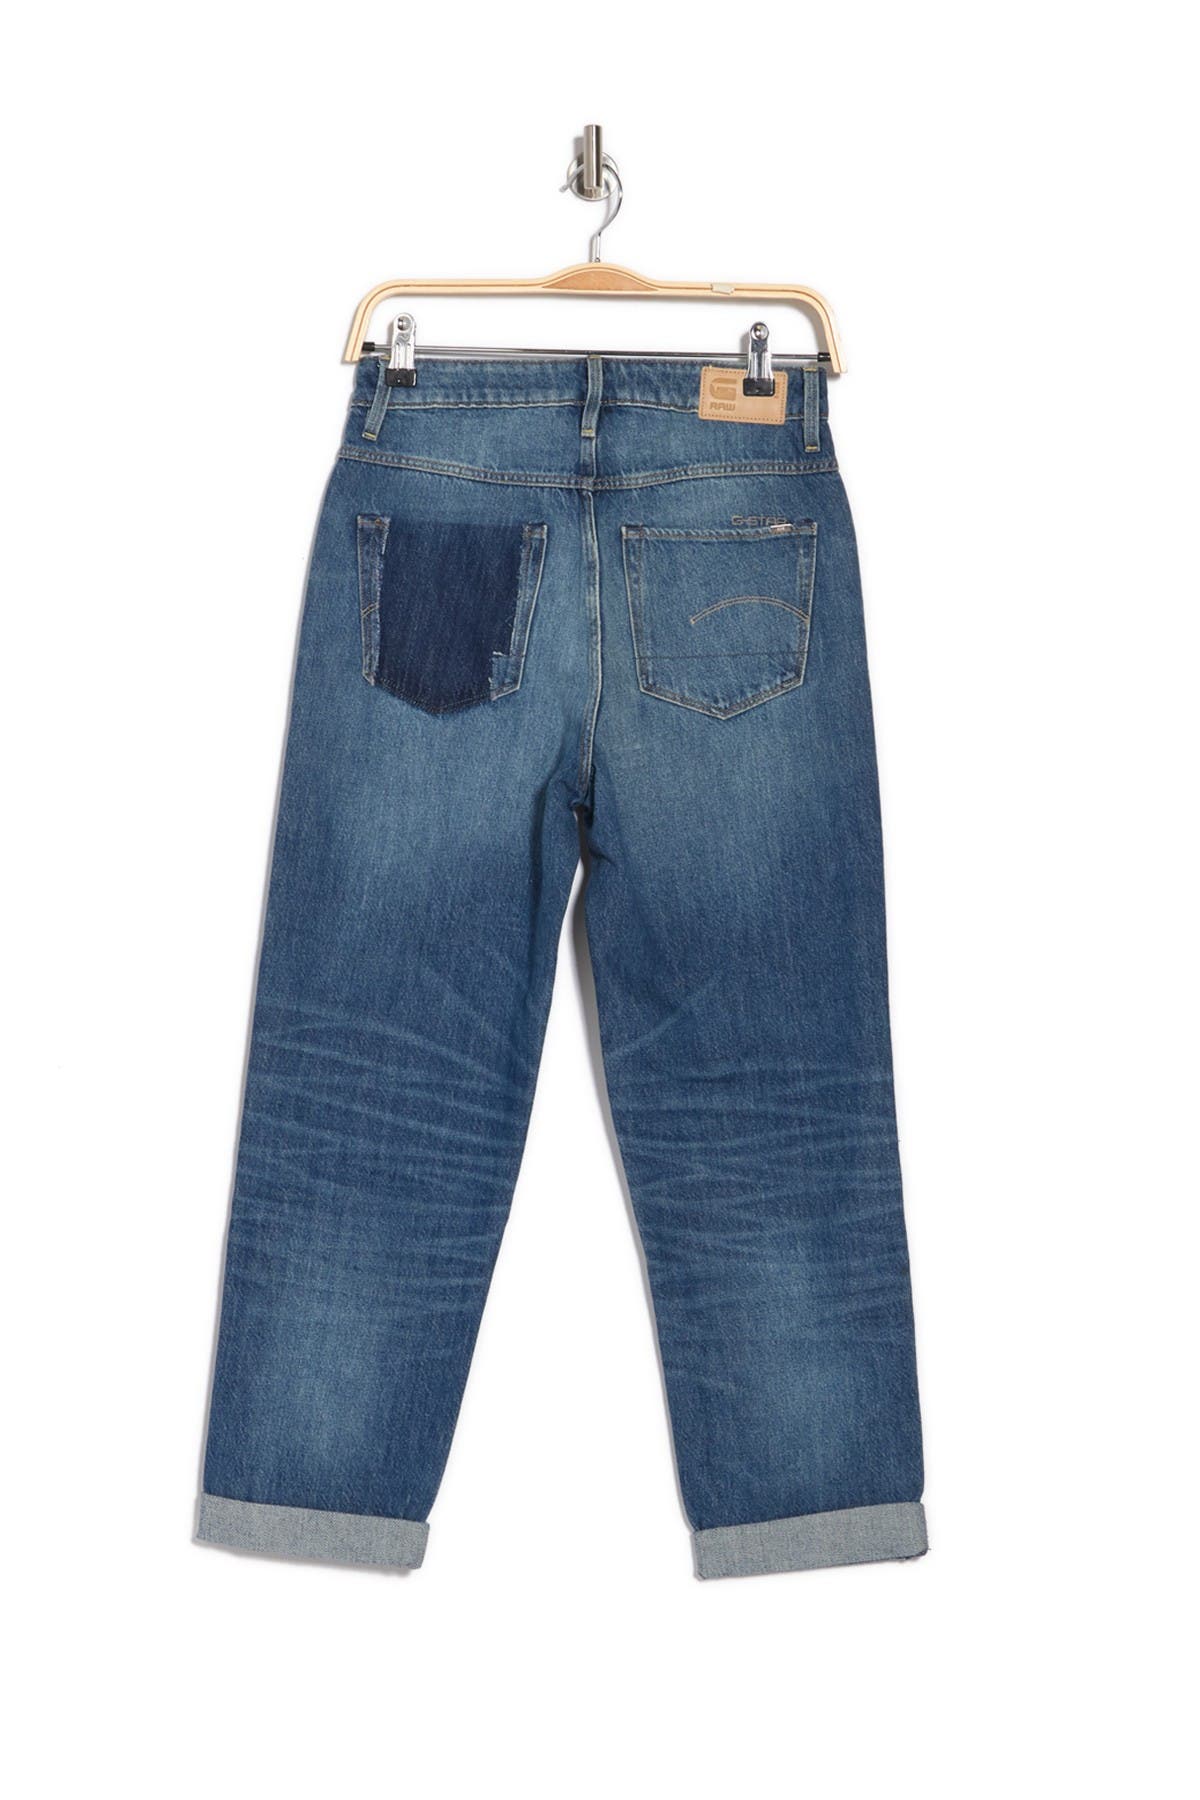 g star jeans true to size